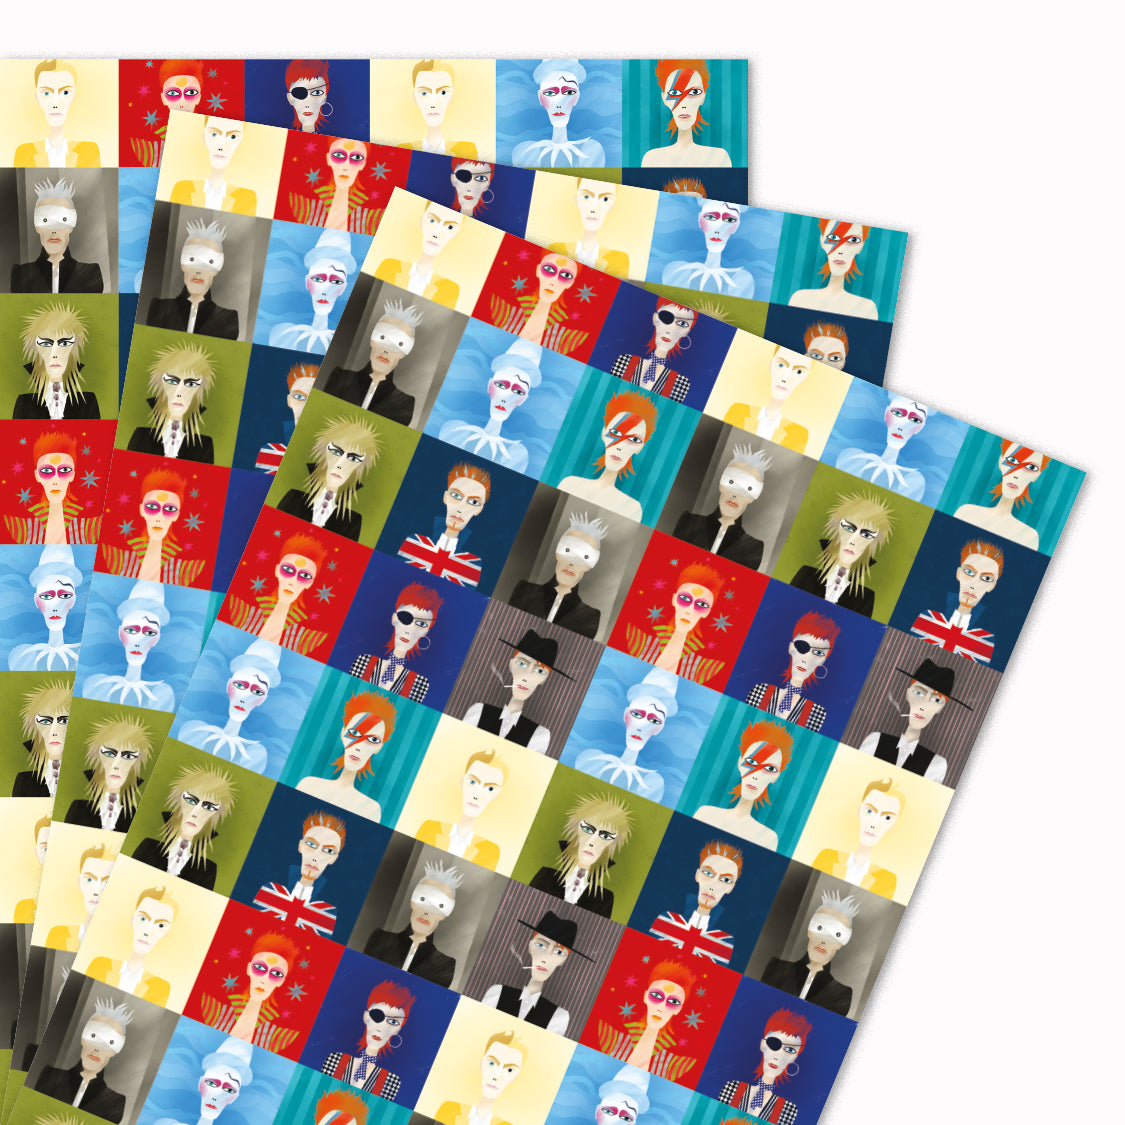 Pack of 3 'Changes' gift wrap sheets illustrated by Anastasia Tribambuka for USTUDIO Design. This design features the artist's own illustrative interpretation of the many changing and iconic styles of the legendary David Bowie. Perfect for music lovers.